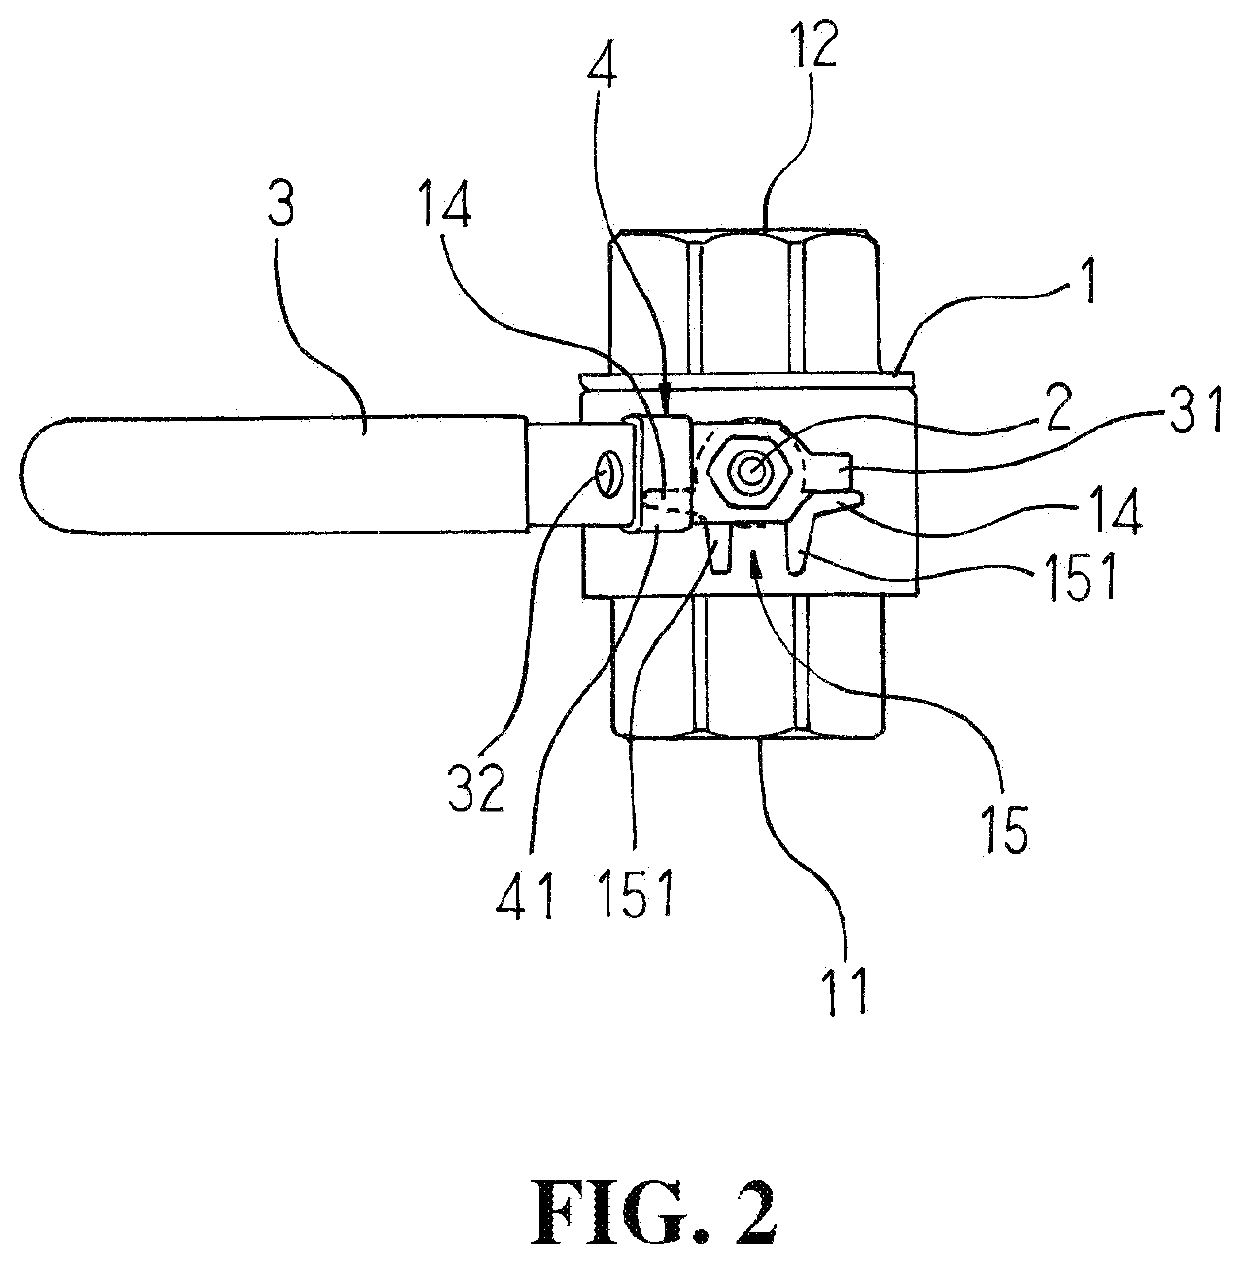 Ball valve positioning structure